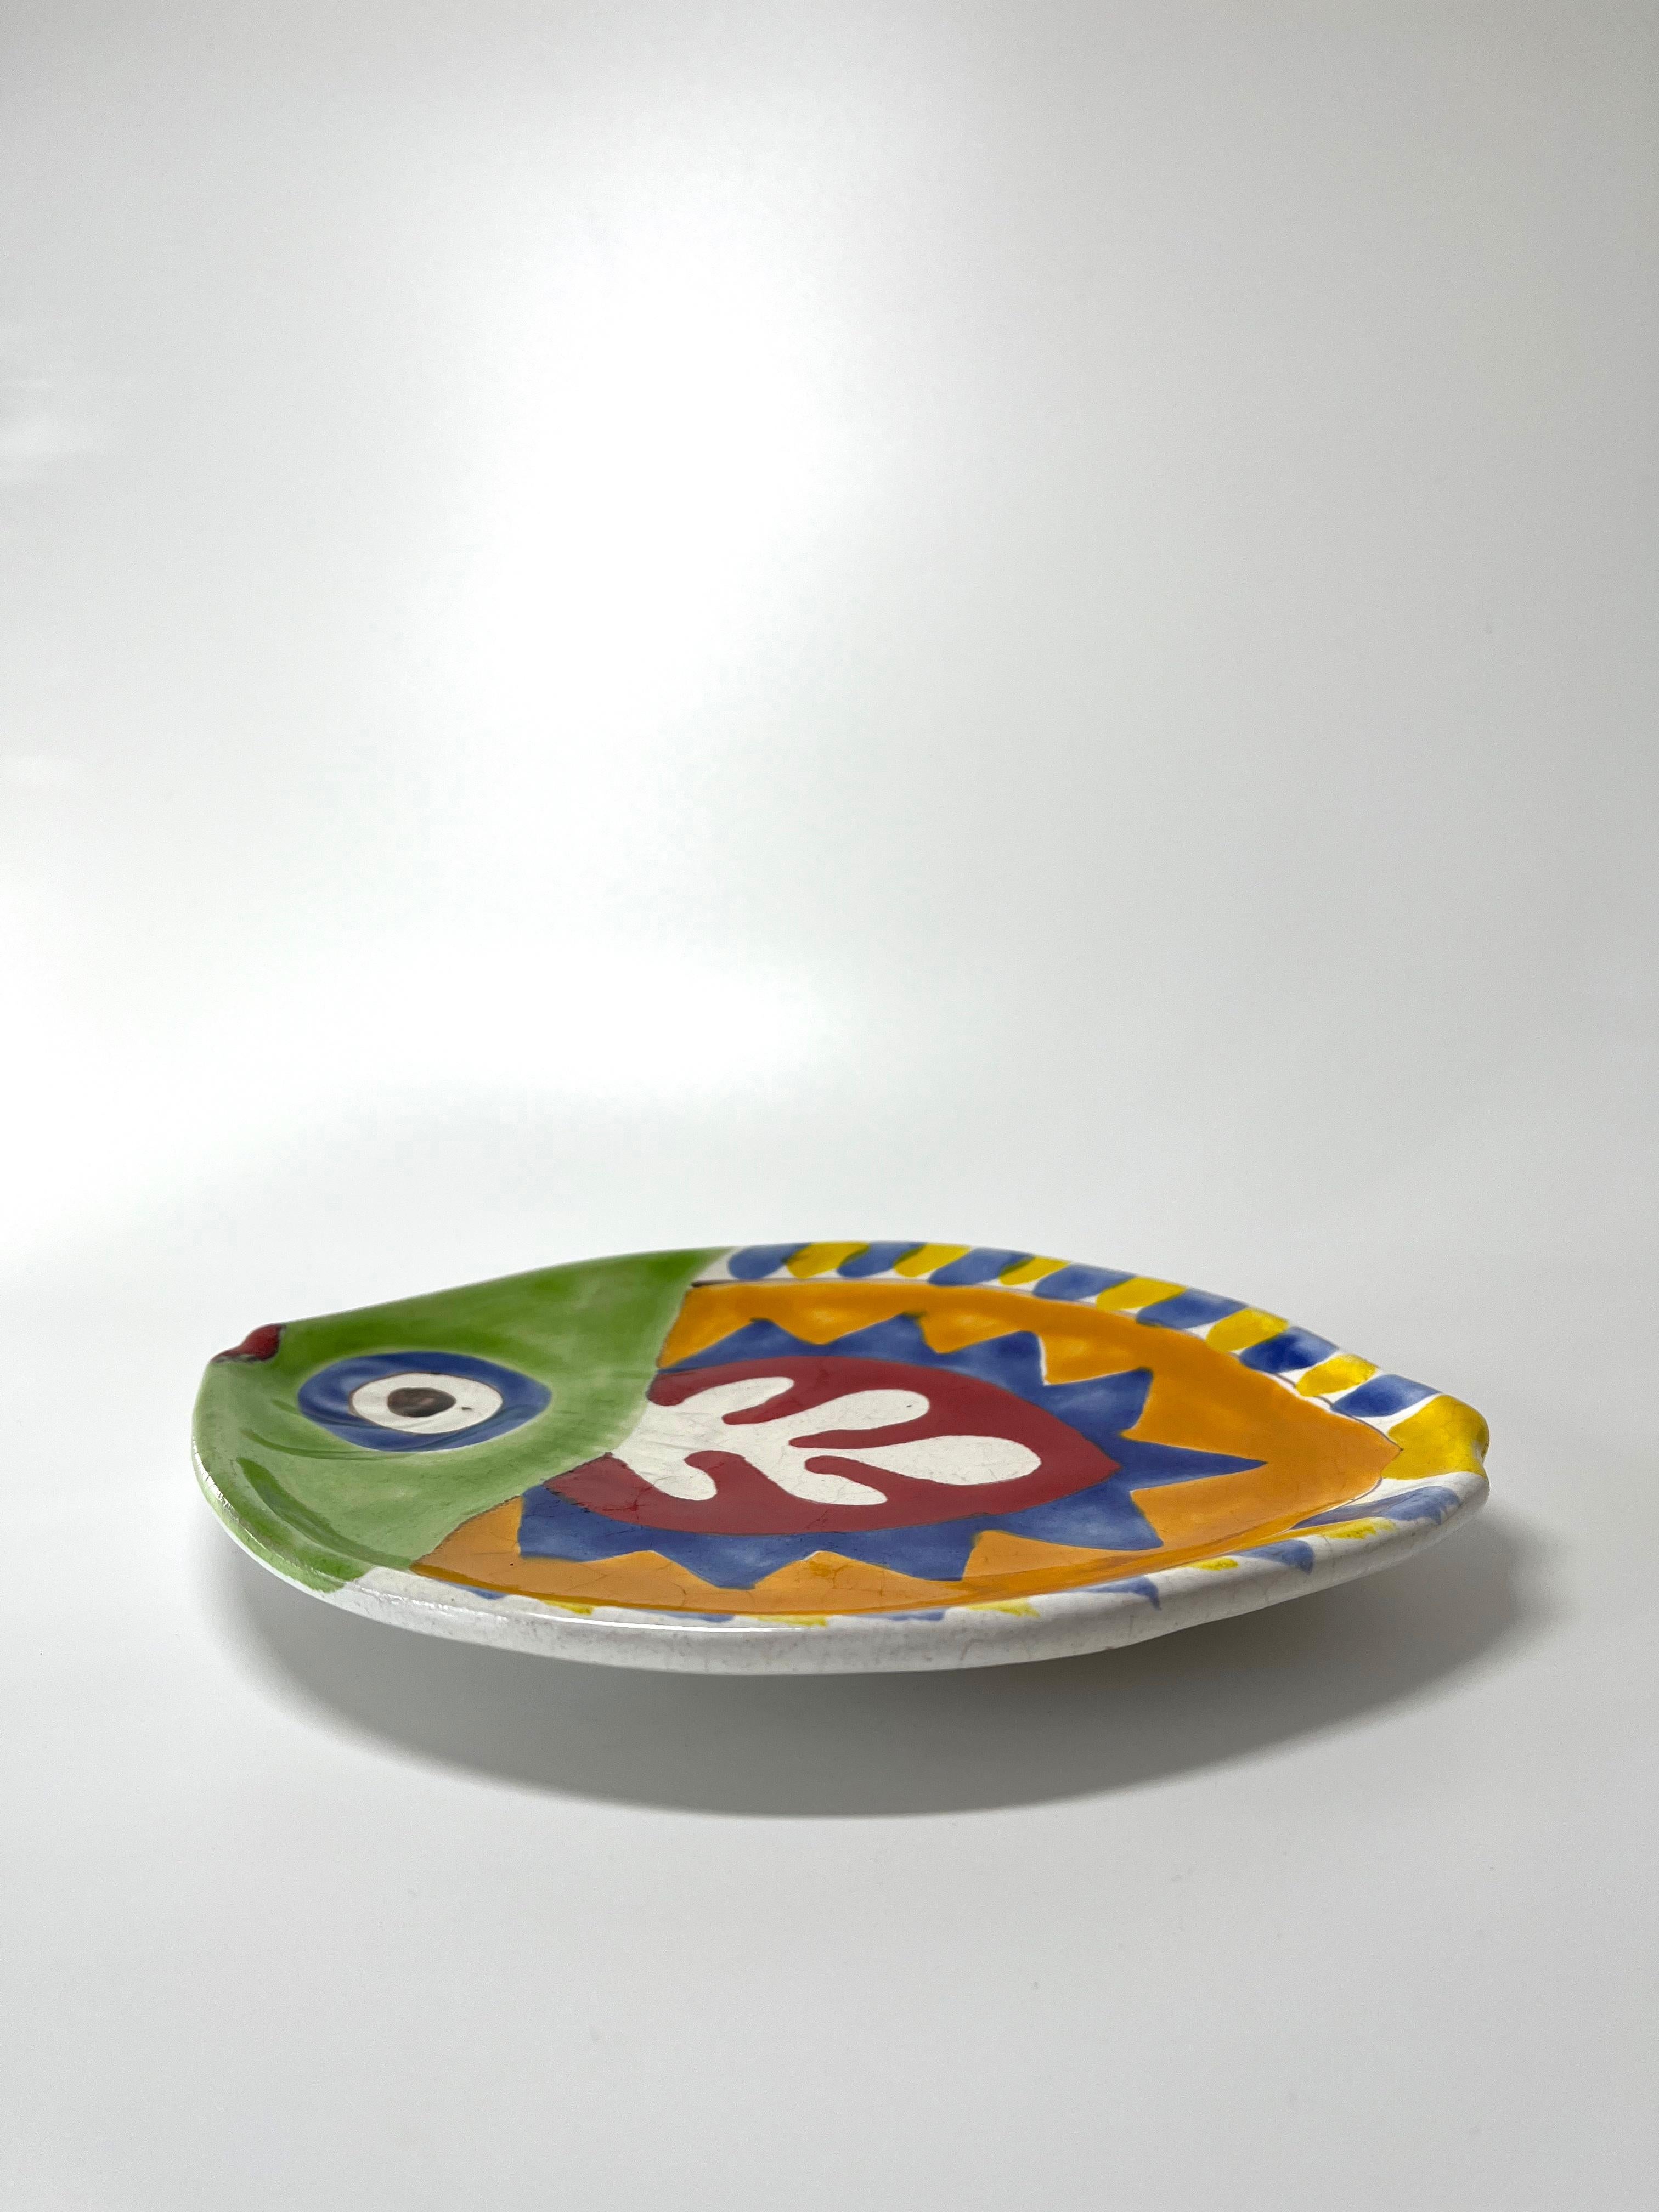 Hand-Painted Vibrantly Coloured Ceramic Fish Platter By DeSimone, Italy, c1960